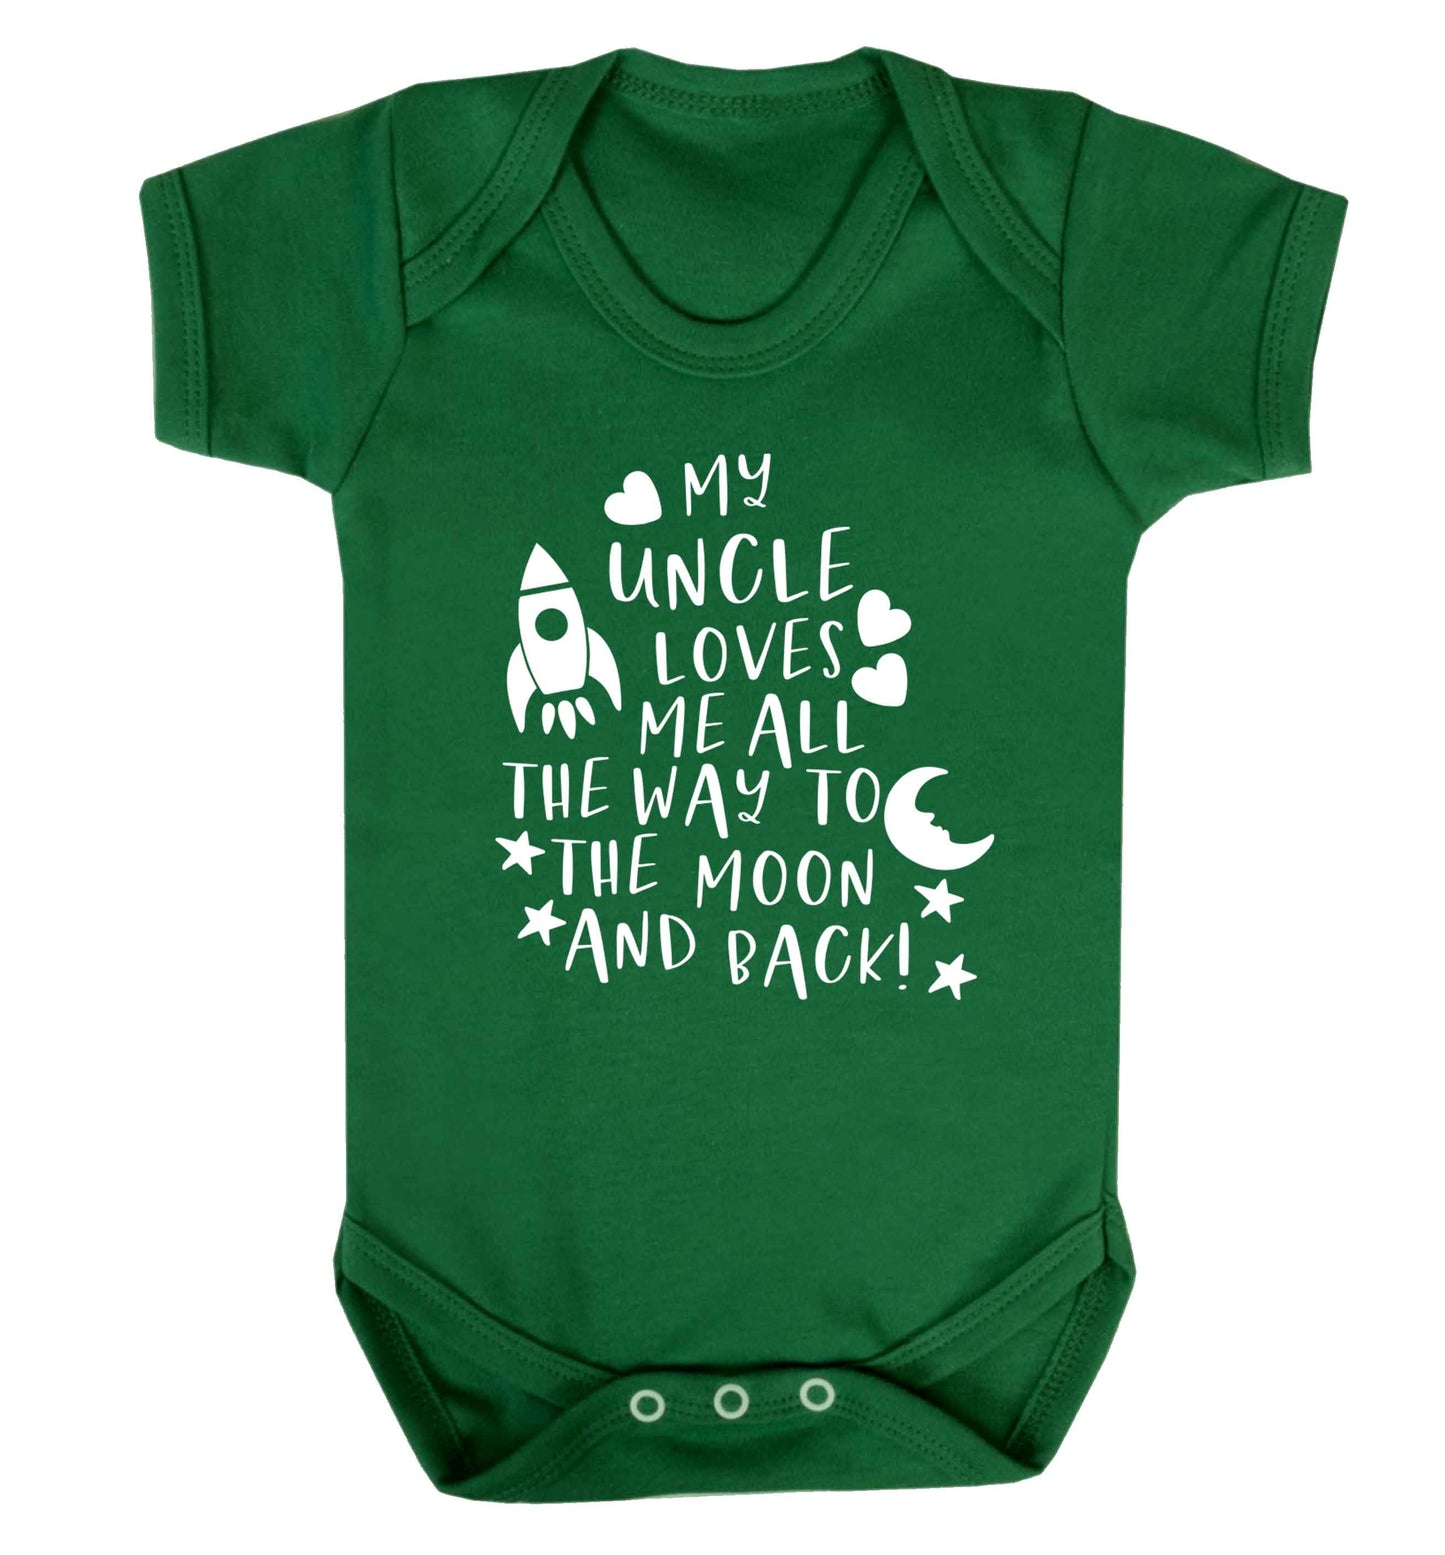 My uncle loves me all the way to the moon and back Baby Vest green 18-24 months